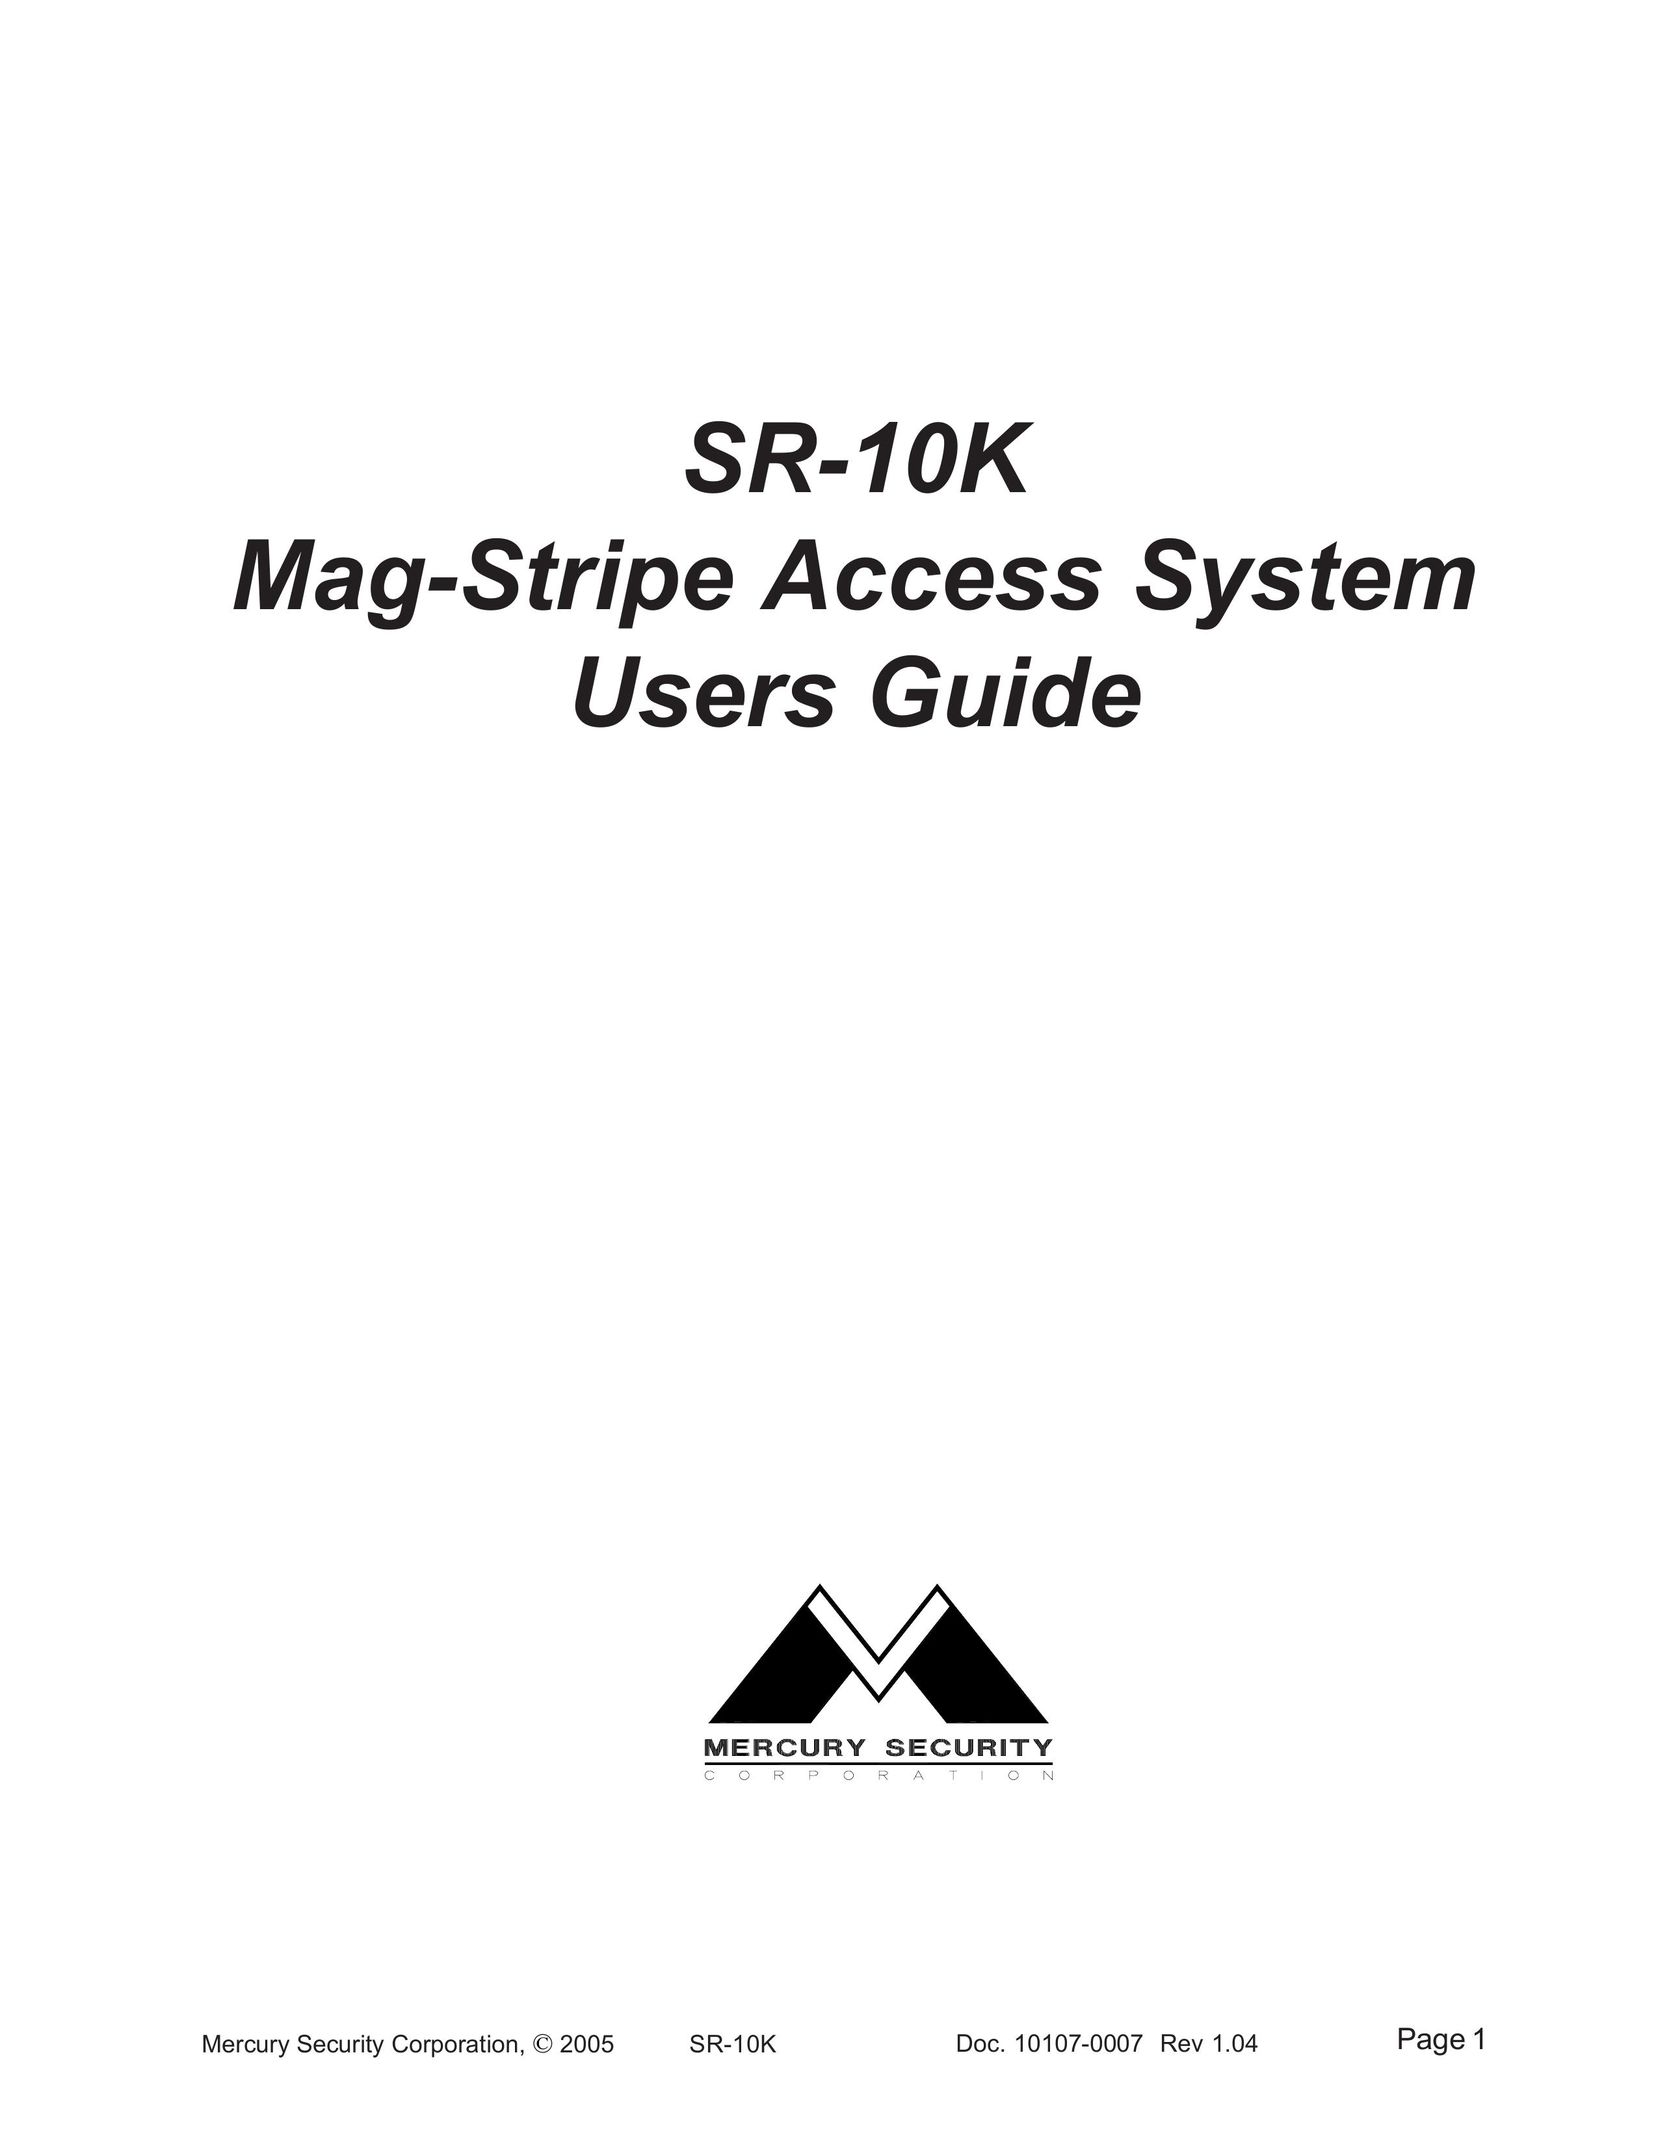 Mercury SR-10K Mag-Stripe Access System Home Security System User Manual